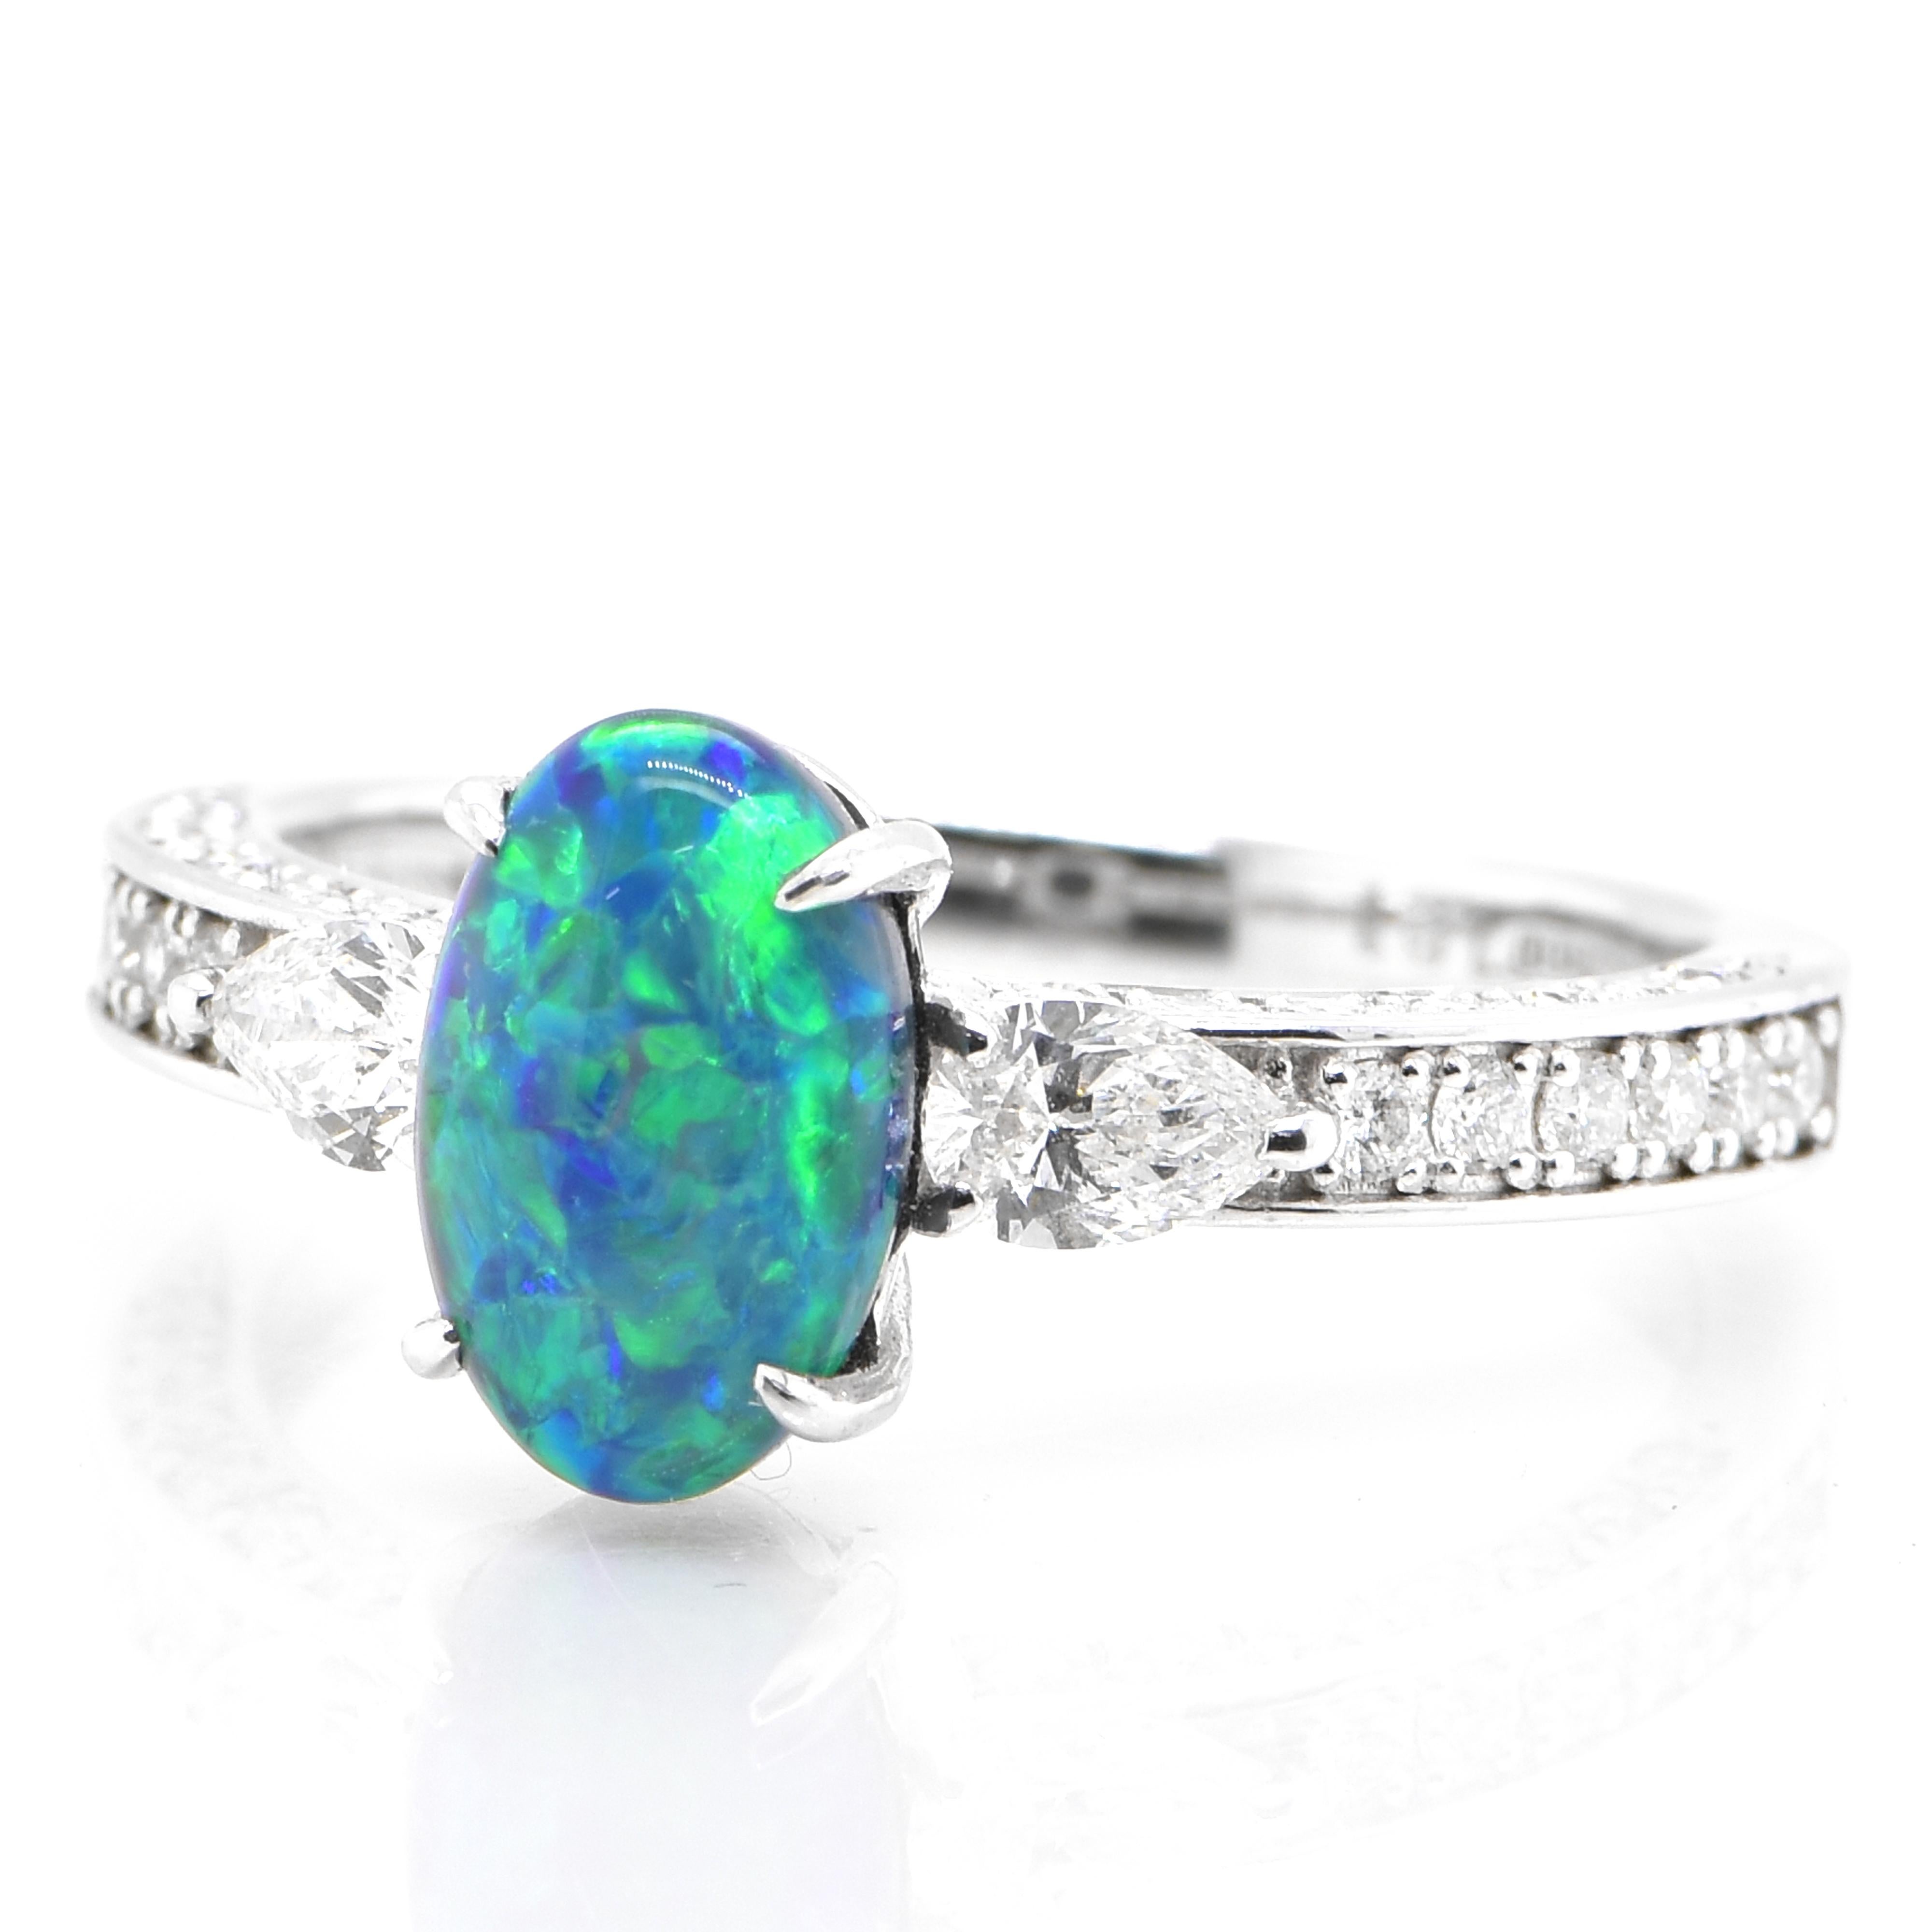 A beautiful ring featuring a 1.21 Carat, Natural, Australian Black Opal and 0.57 Carats of Diamond Accents set in Platinum. The Opal displays very good play of color! Opals are known for exhibiting flashes of rainbow colors known as 